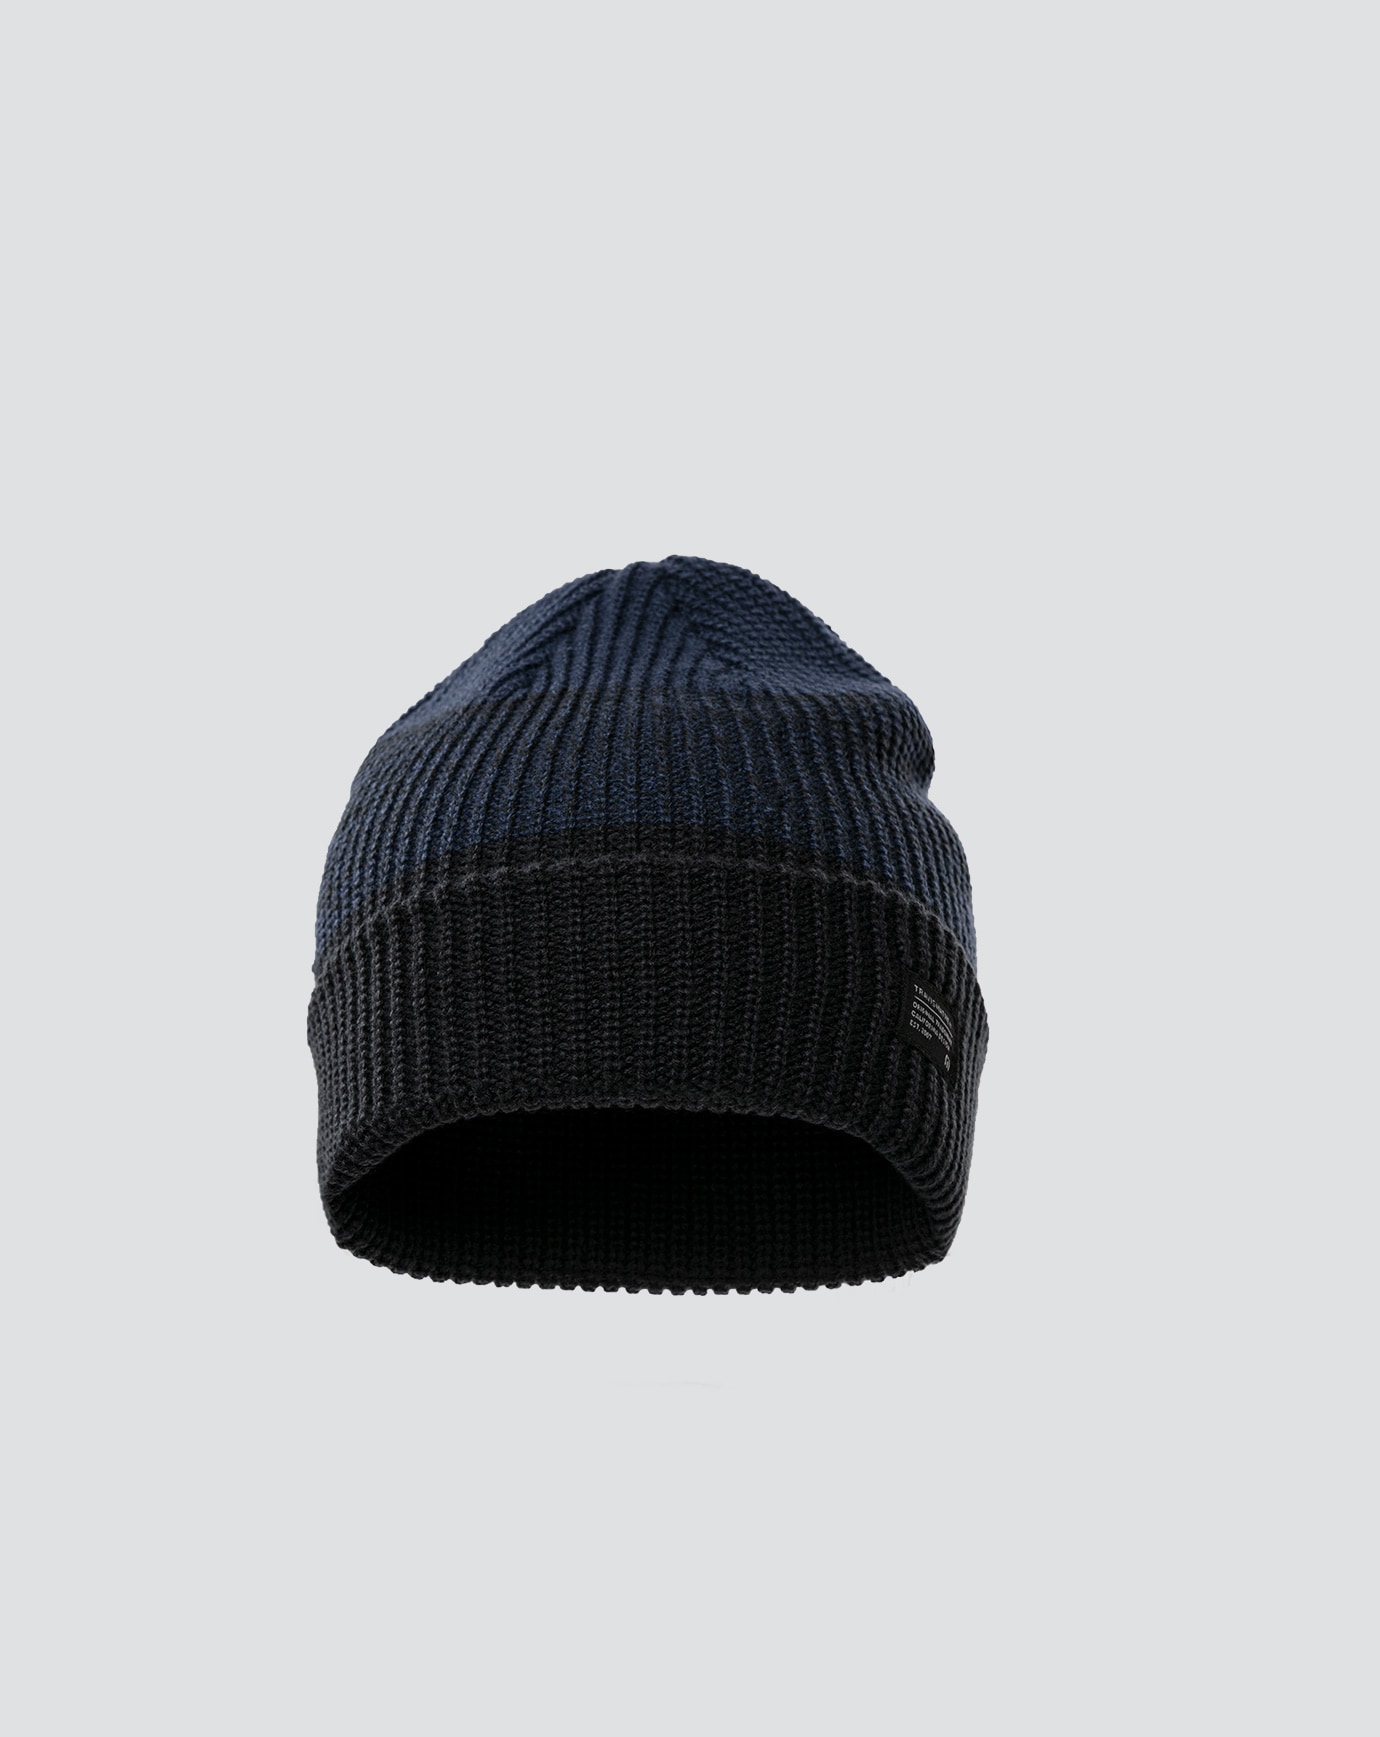 PREVAILING WINDS BEANIE_1MT141_4BLN_